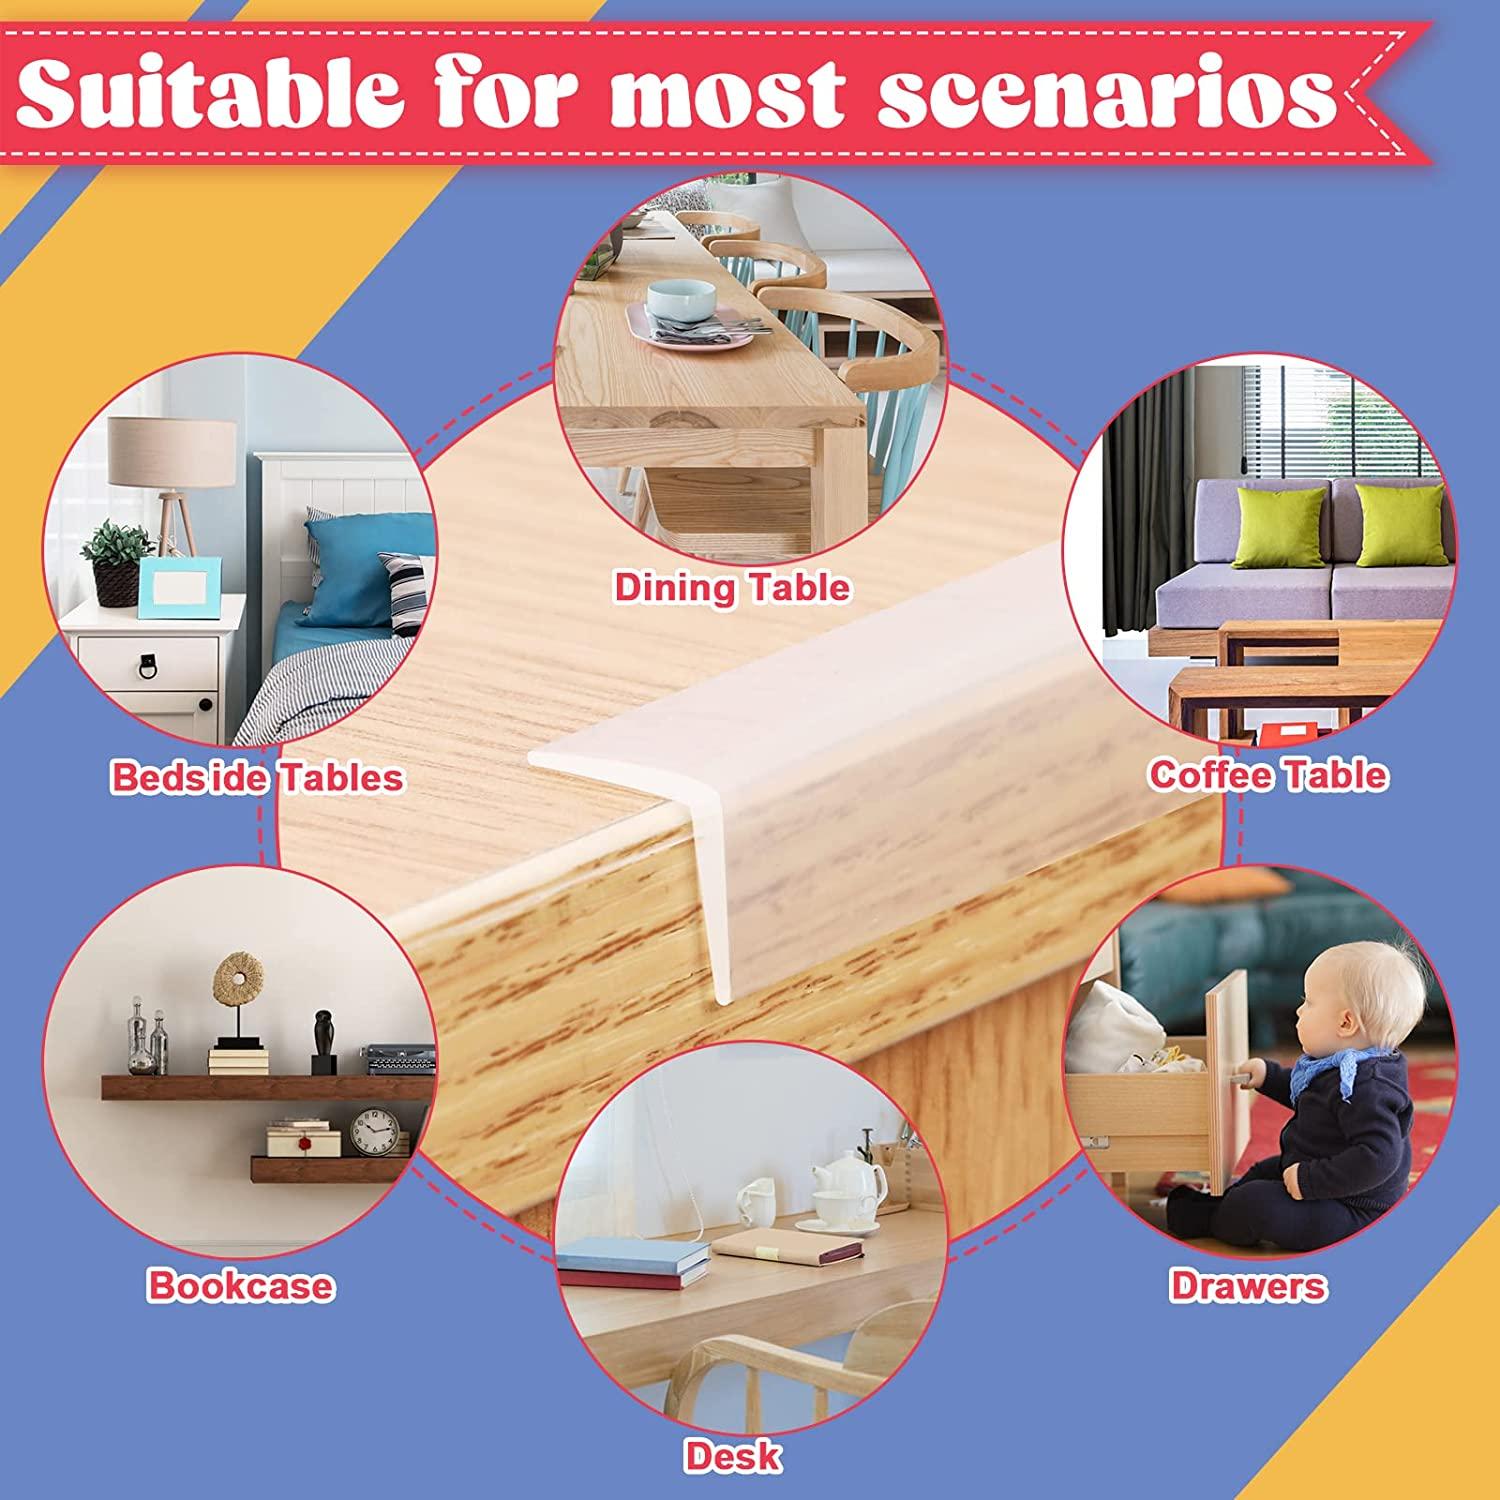 Edge Protector, Multifunctional Child Safety Edge Guard Table Corner  Protection Thicken Corner Guard With Adhesive, Suitable For Sharp Edge Of  Furniture